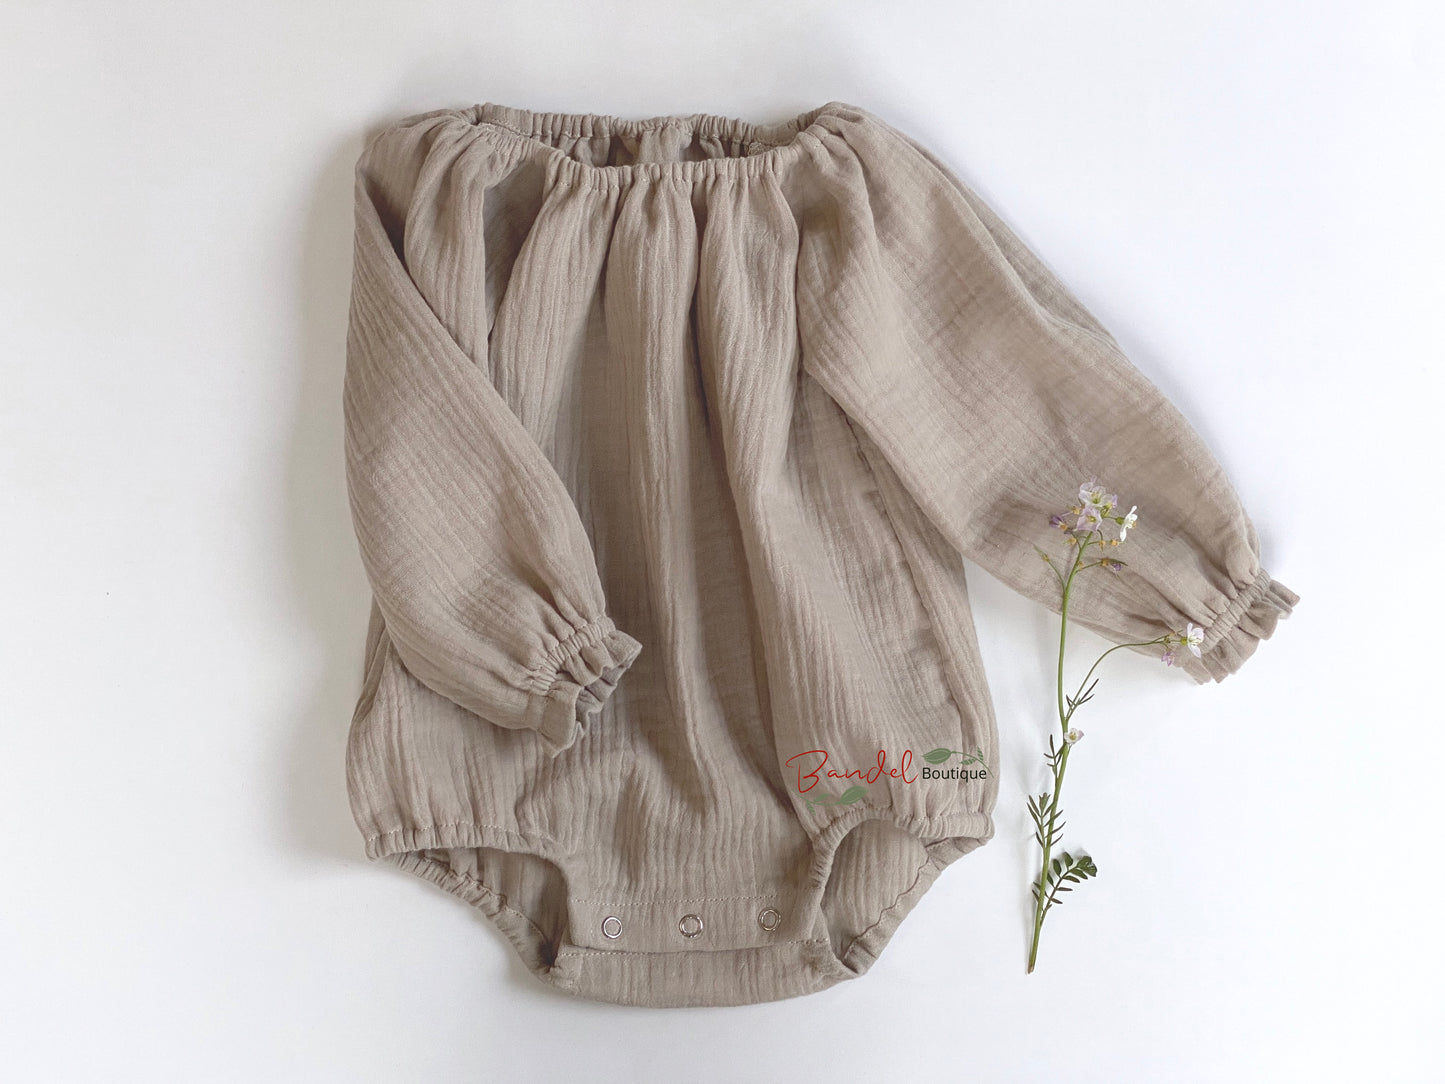 Handmade in The Netherlands sand- brown minimalist newborn baby romper with long sleeves, made from breathable and soft double gauze organic fabric. Features elasticized openings and crotch snaps for easy dressing and maximum comfort. 